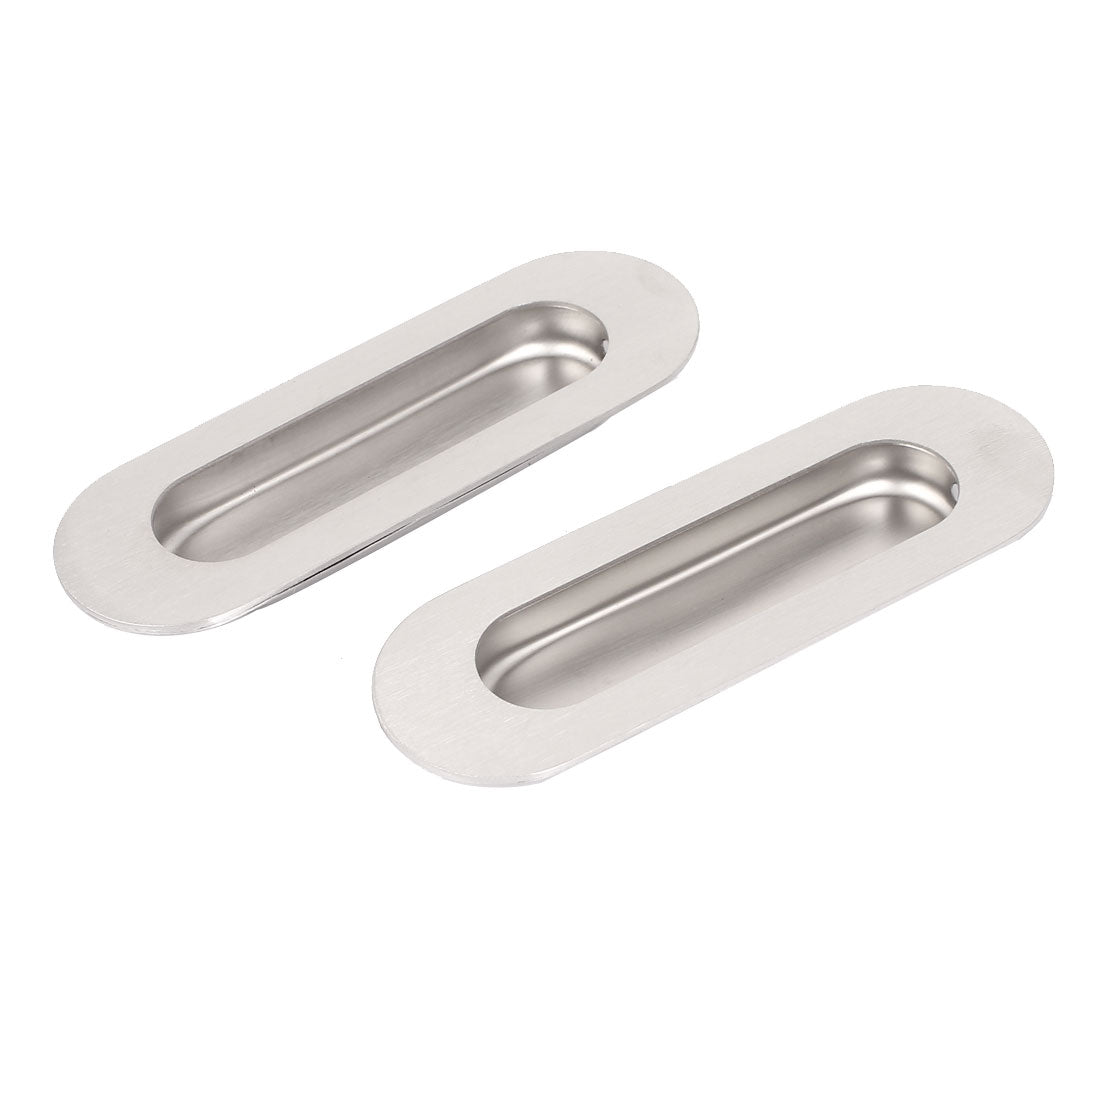 uxcell Uxcell Oval Metal Recessed Cabinet Door Flush Pull Handle Hardware 40mmx120mm 2Pcs